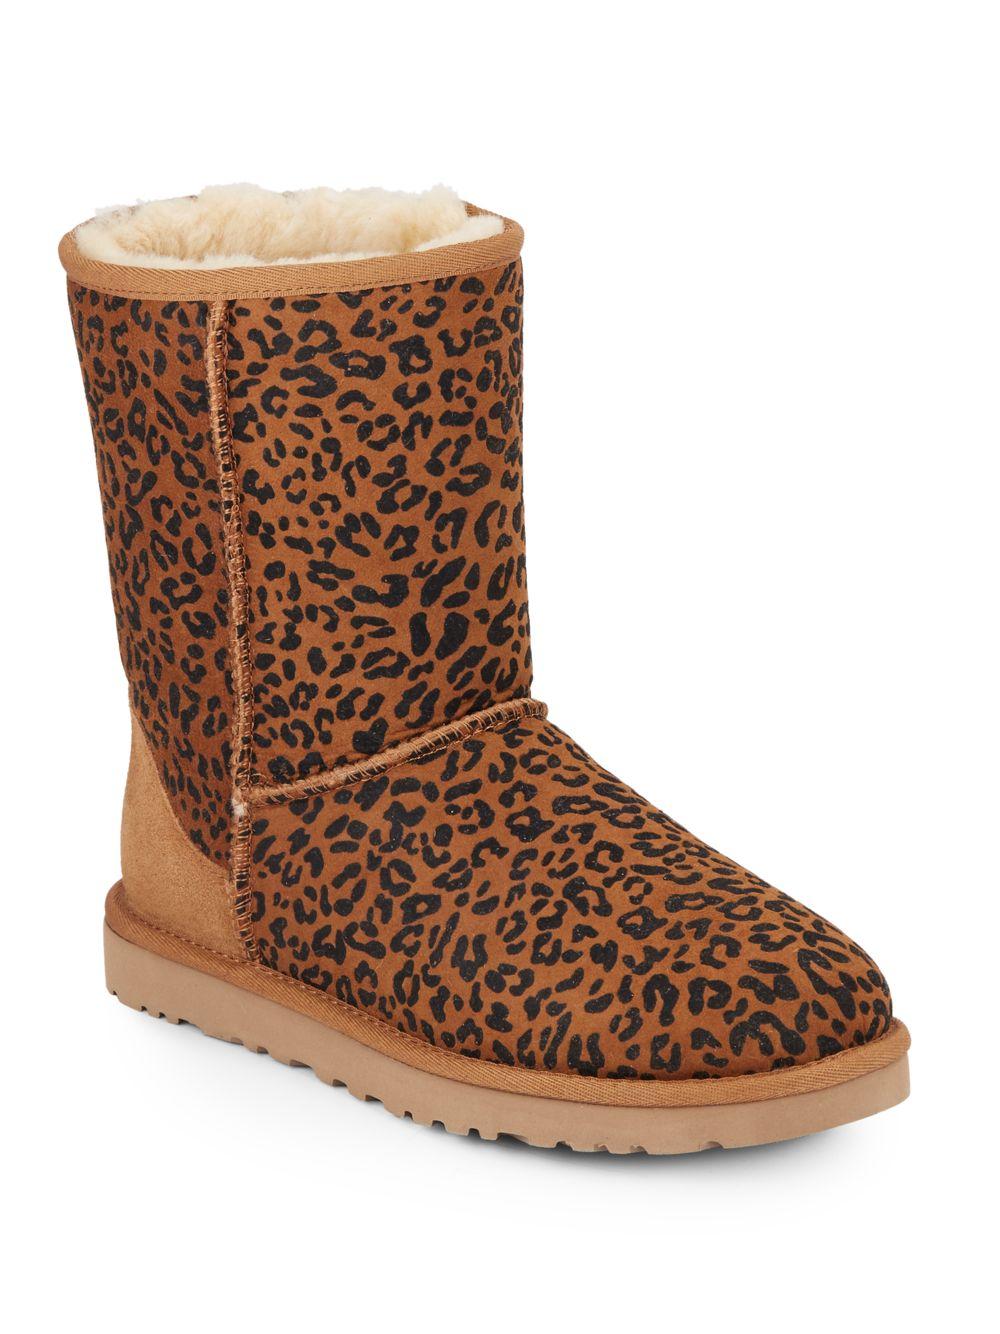 UGG Classic Short Shearling-lined Leopard-print Suede Boots in Chestnut ...